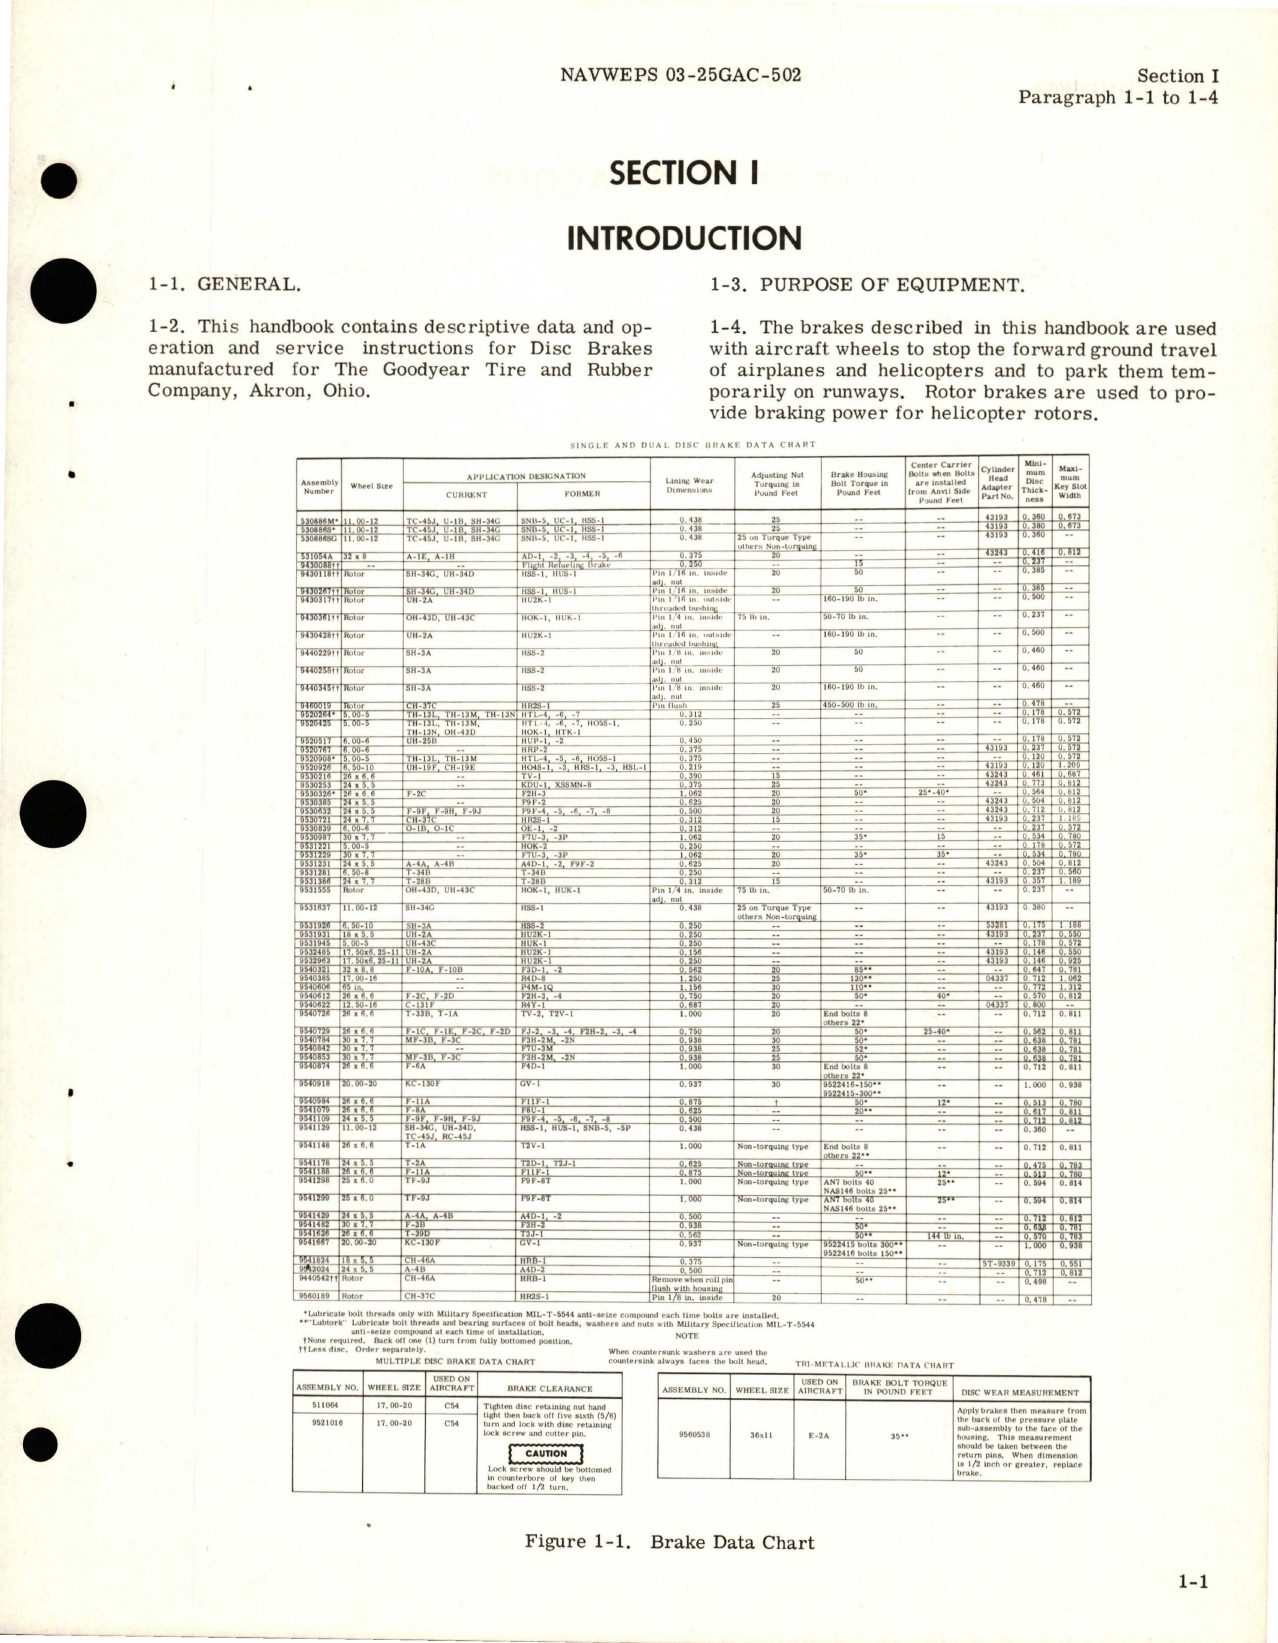 Sample page 5 from AirCorps Library document: Operation and Service Instructions for Disc Brakes